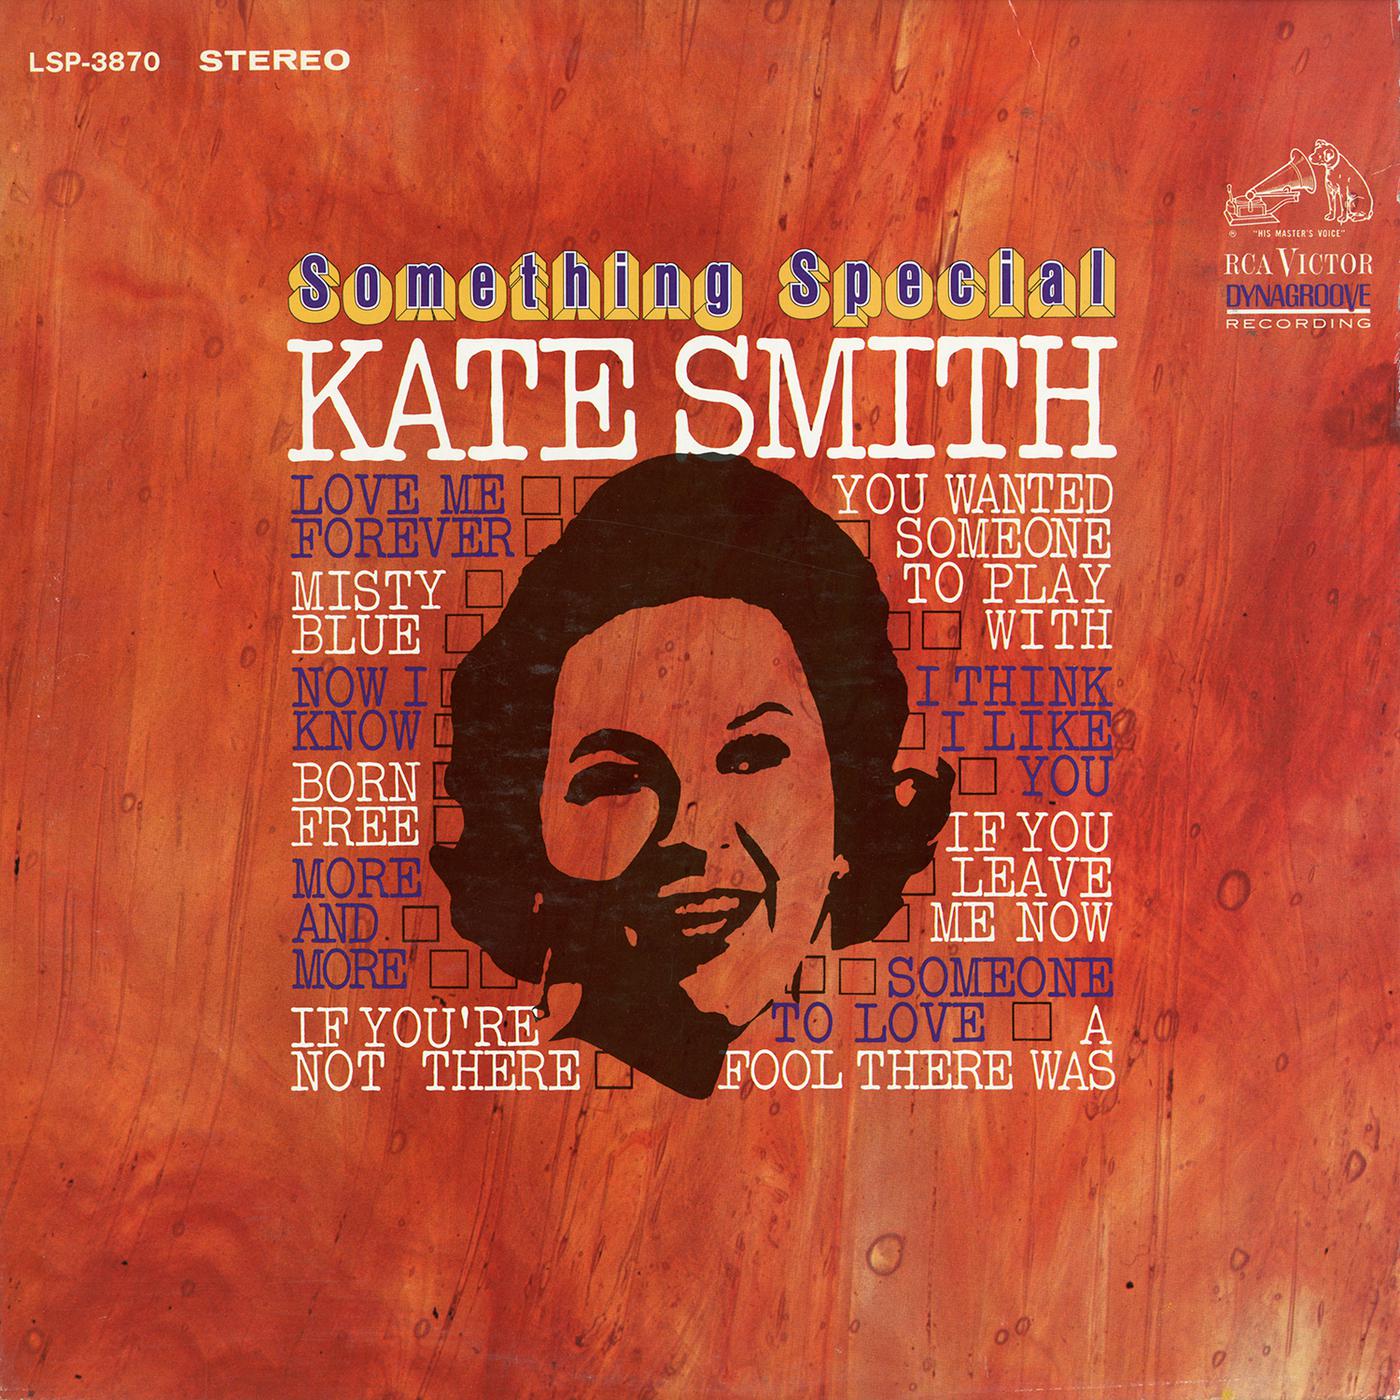 Kate Smith - A Fool There Was